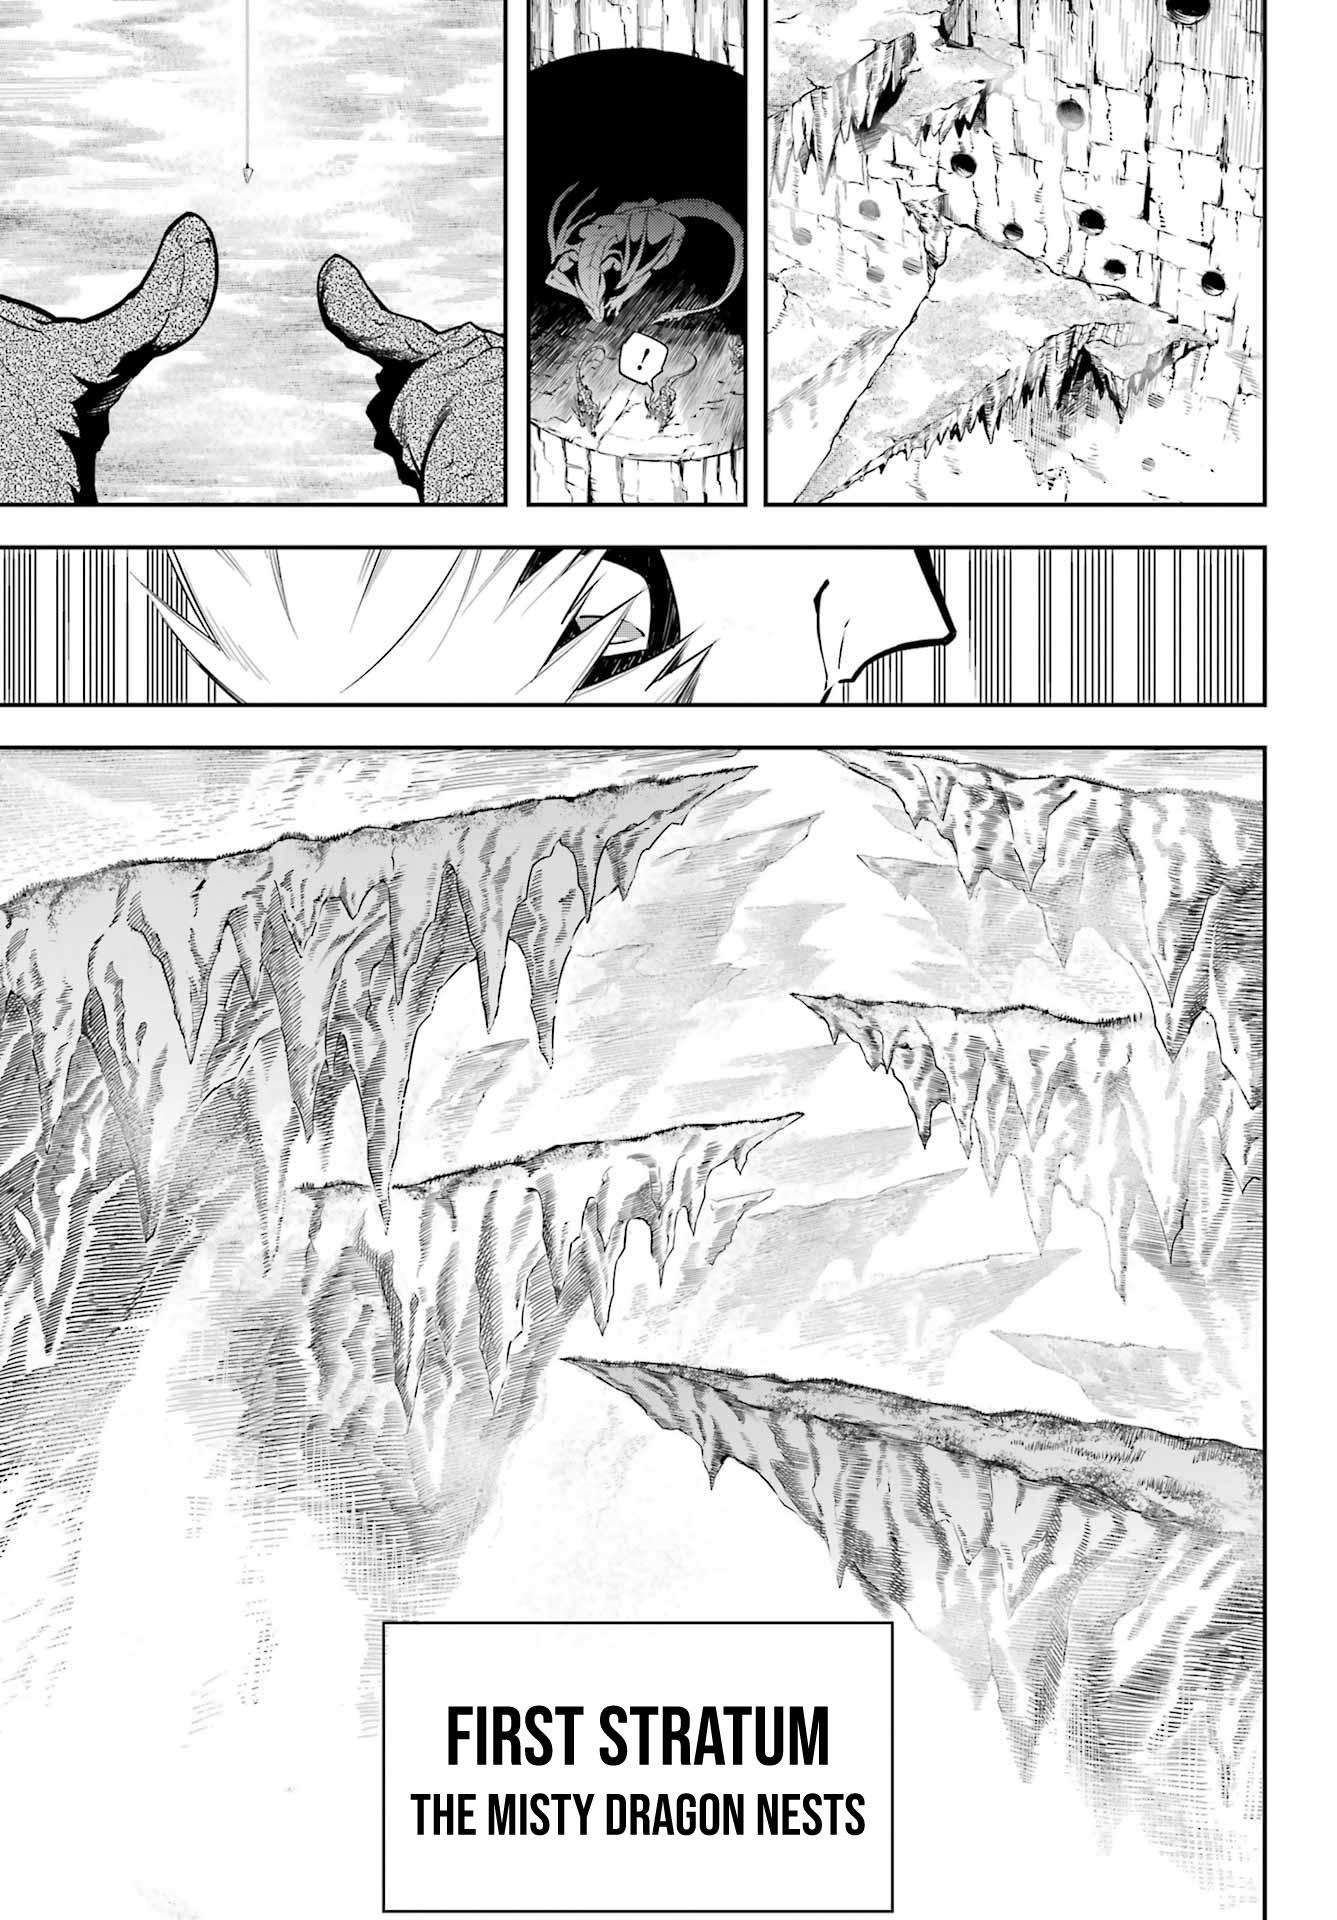 Read The Venom Dragon Chapter 66 on Reaper Scans